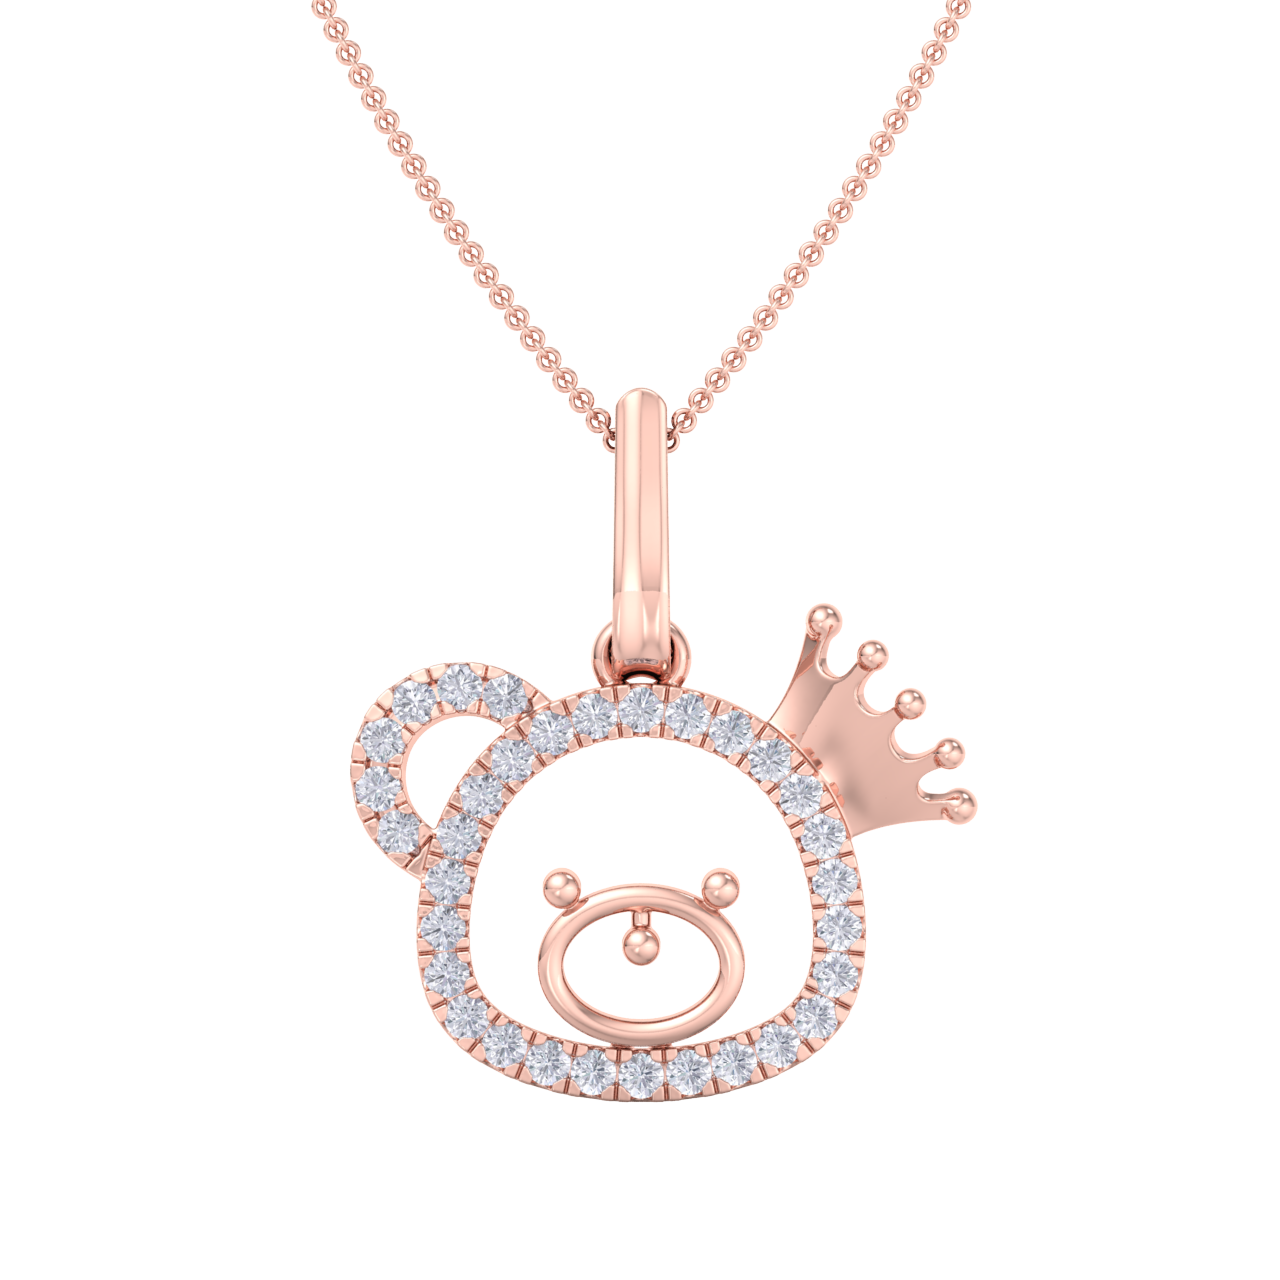 Cute Pendant in rose gold with white diamonds of 0.58 ct in weight